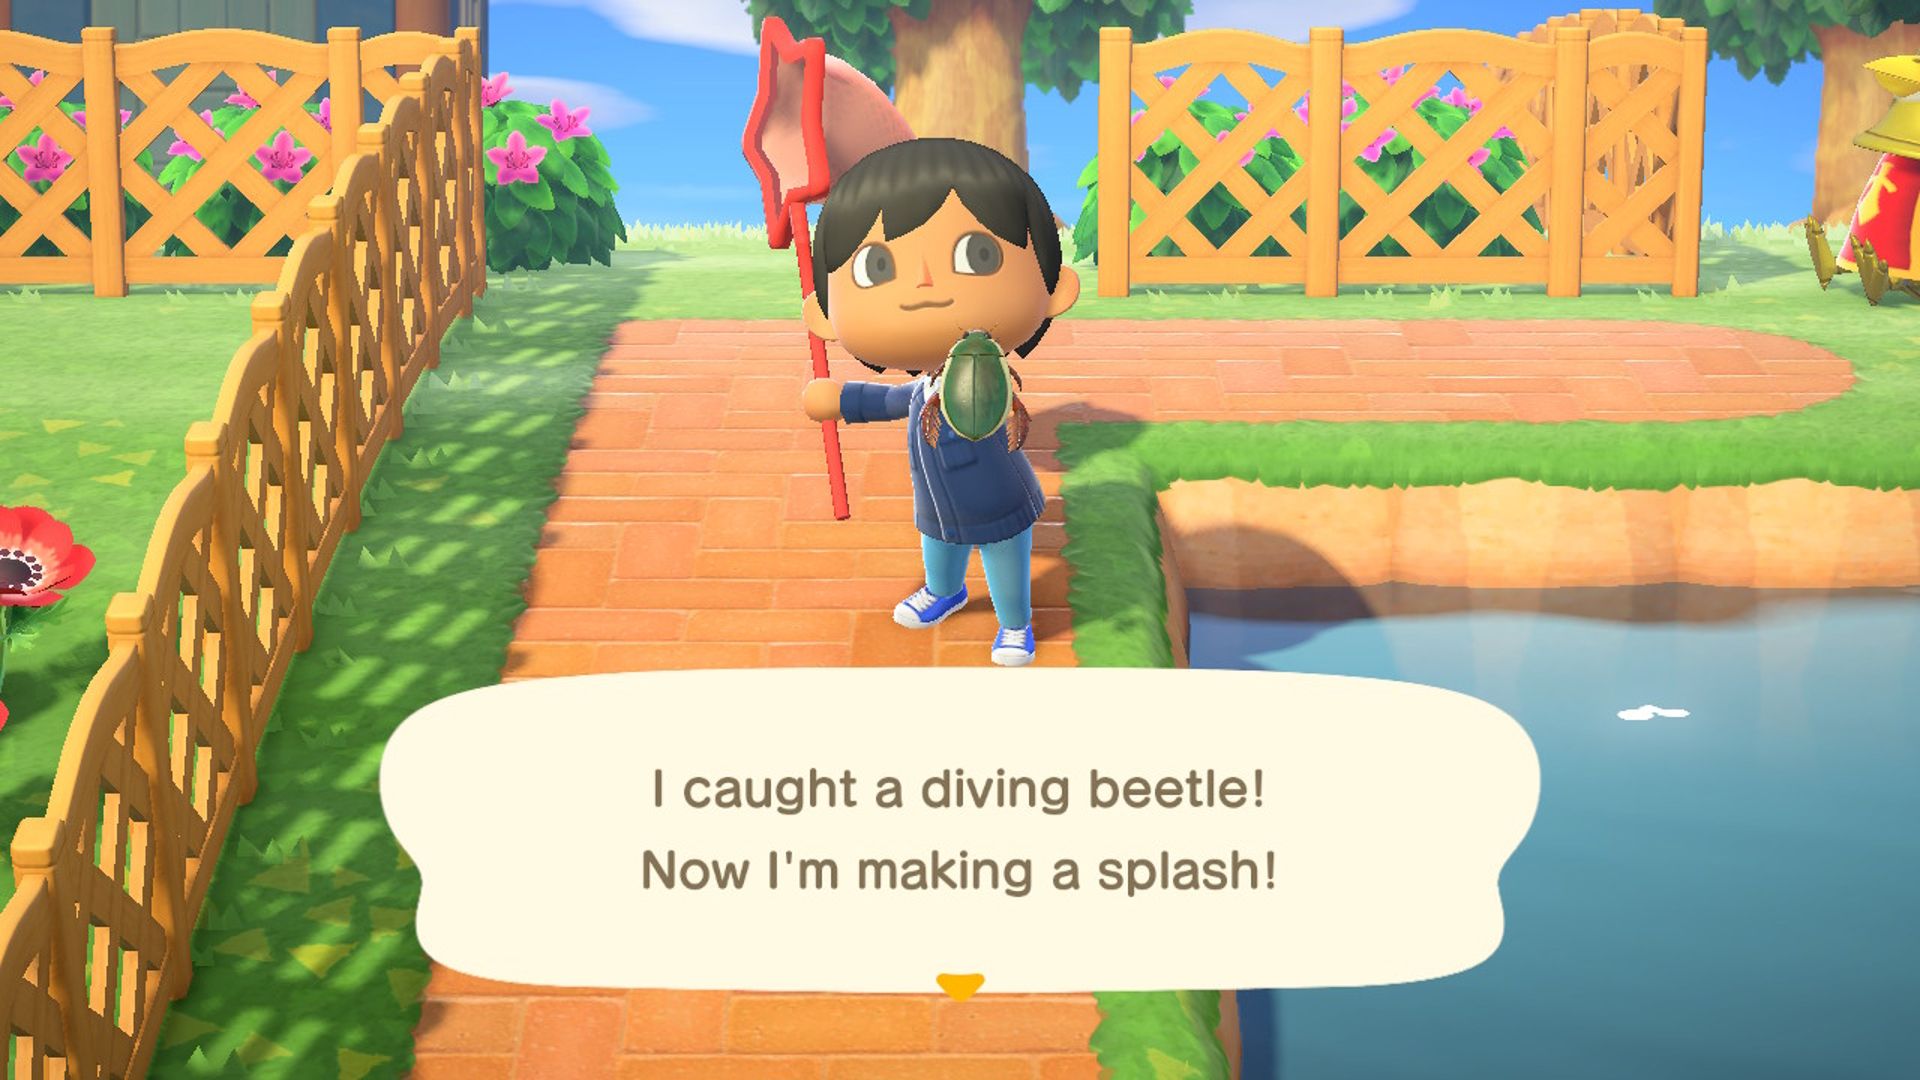 New Horizons Animal Crossing player shows off his diving beetle while standing near the pond and fences and holding a red star-shaped net